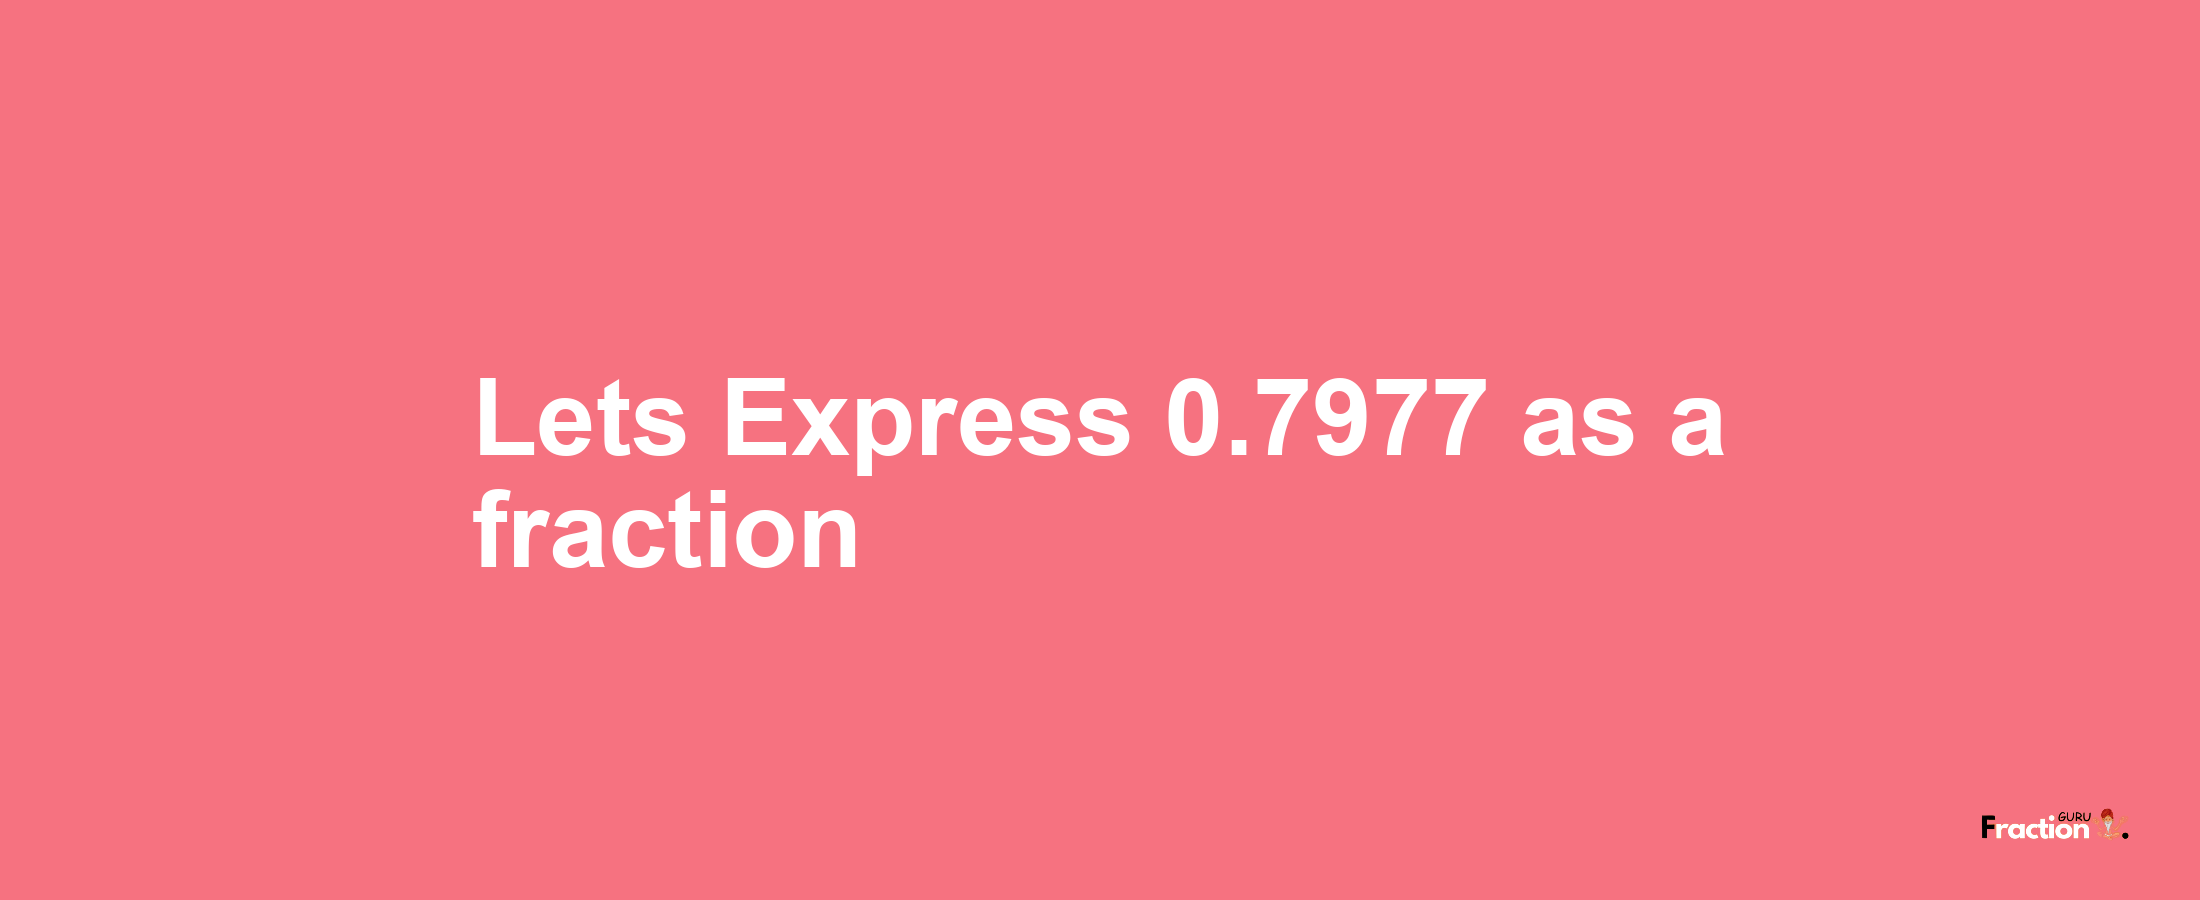 Lets Express 0.7977 as afraction